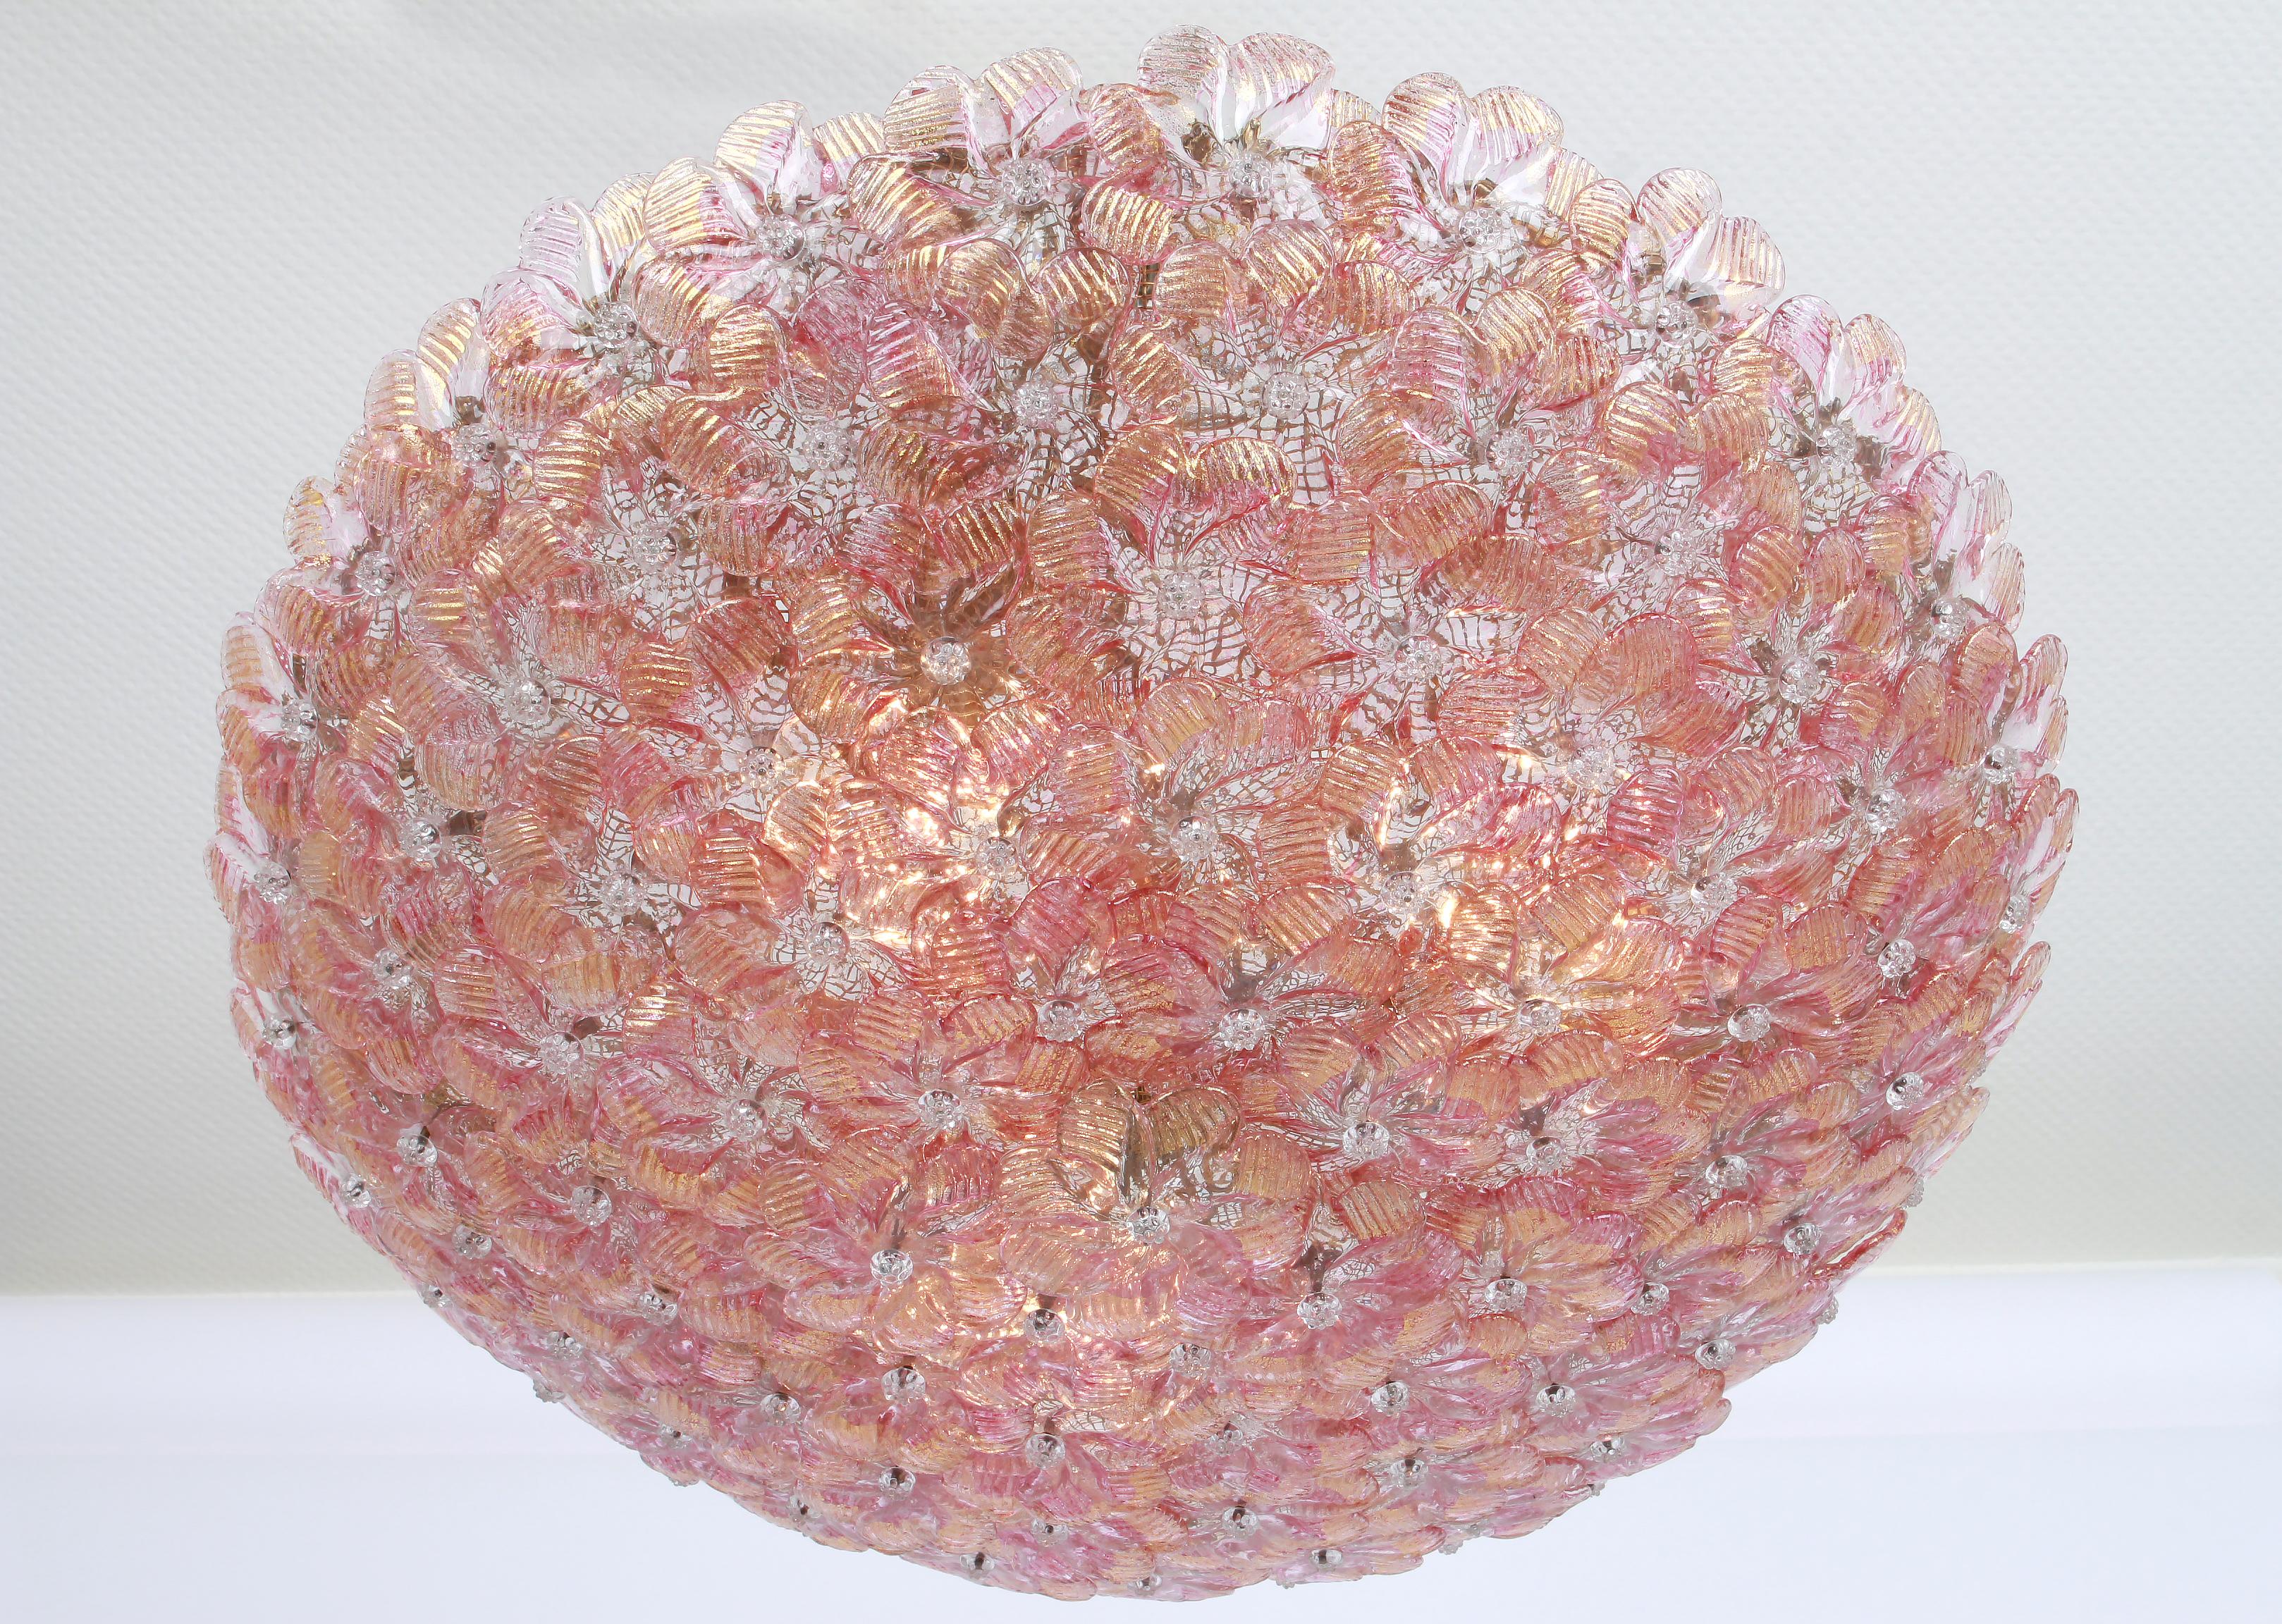 Midcentury Murano Glass Ceiling Fixture by Barovier & Toso, Italy, 1960s For Sale 3